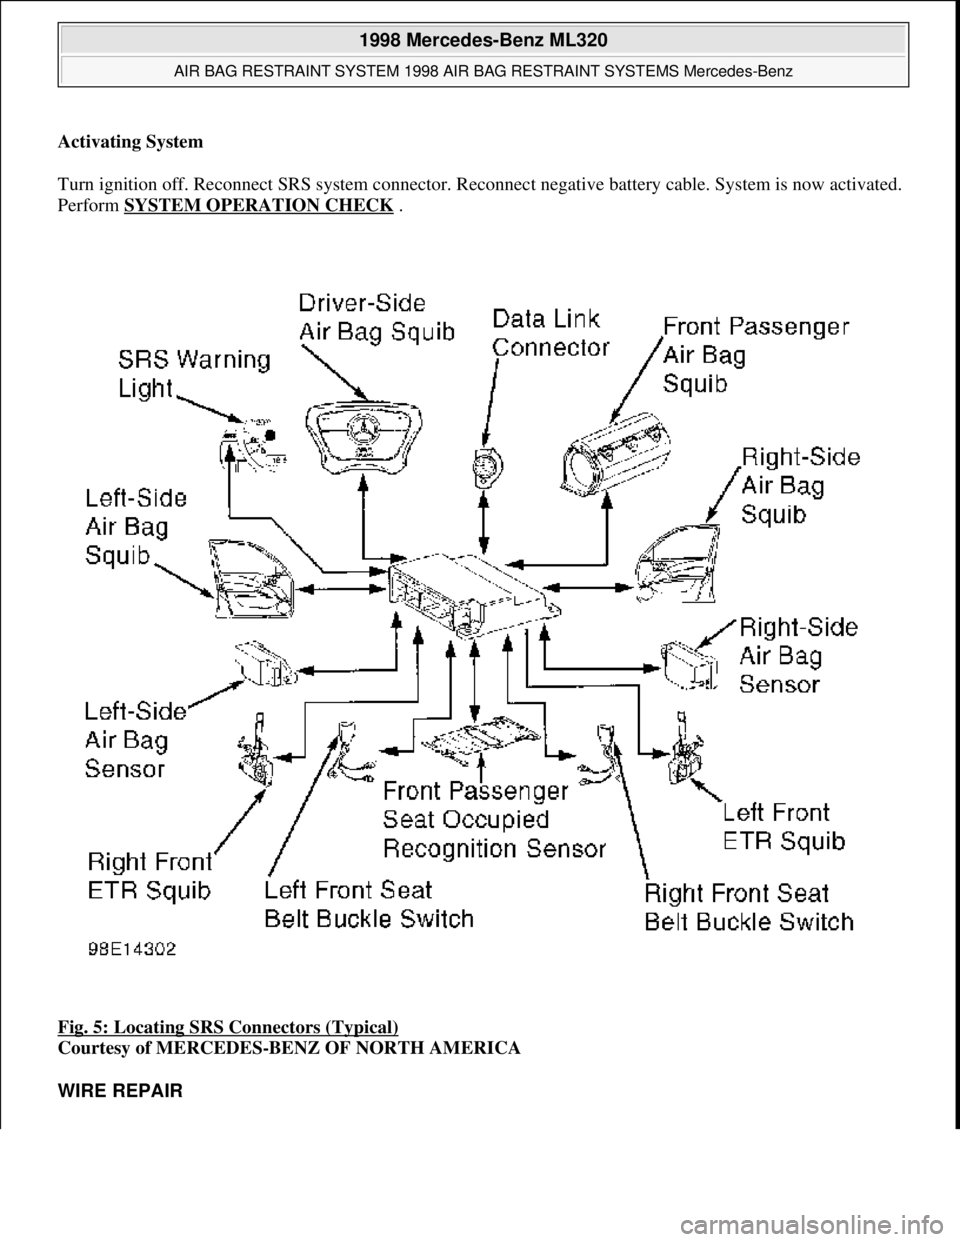 MERCEDES-BENZ ML350 1997  Complete User Guide Activating System    
Turn ignition off. Reconnect SRS syst  em connector. Reconnect negative batt ery cable. System is now activated.  
Perform   SYSTEM OPERATION CHECK
 .  
Fig. 5: Locating SRS Conn